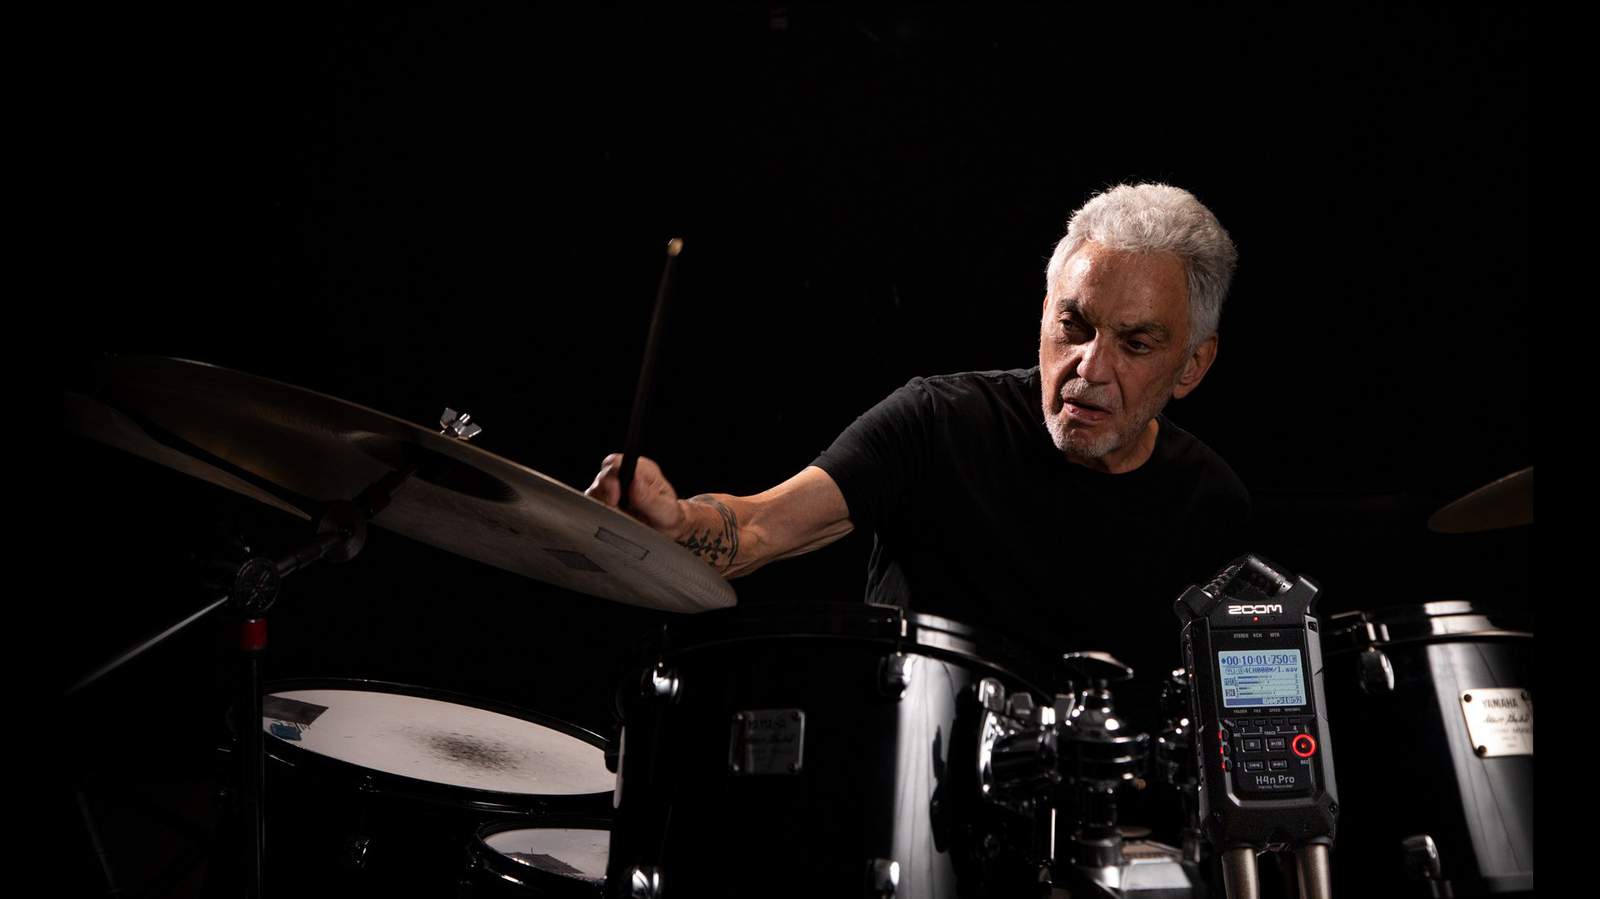 H4n Pro records Steve Gadd playing drums